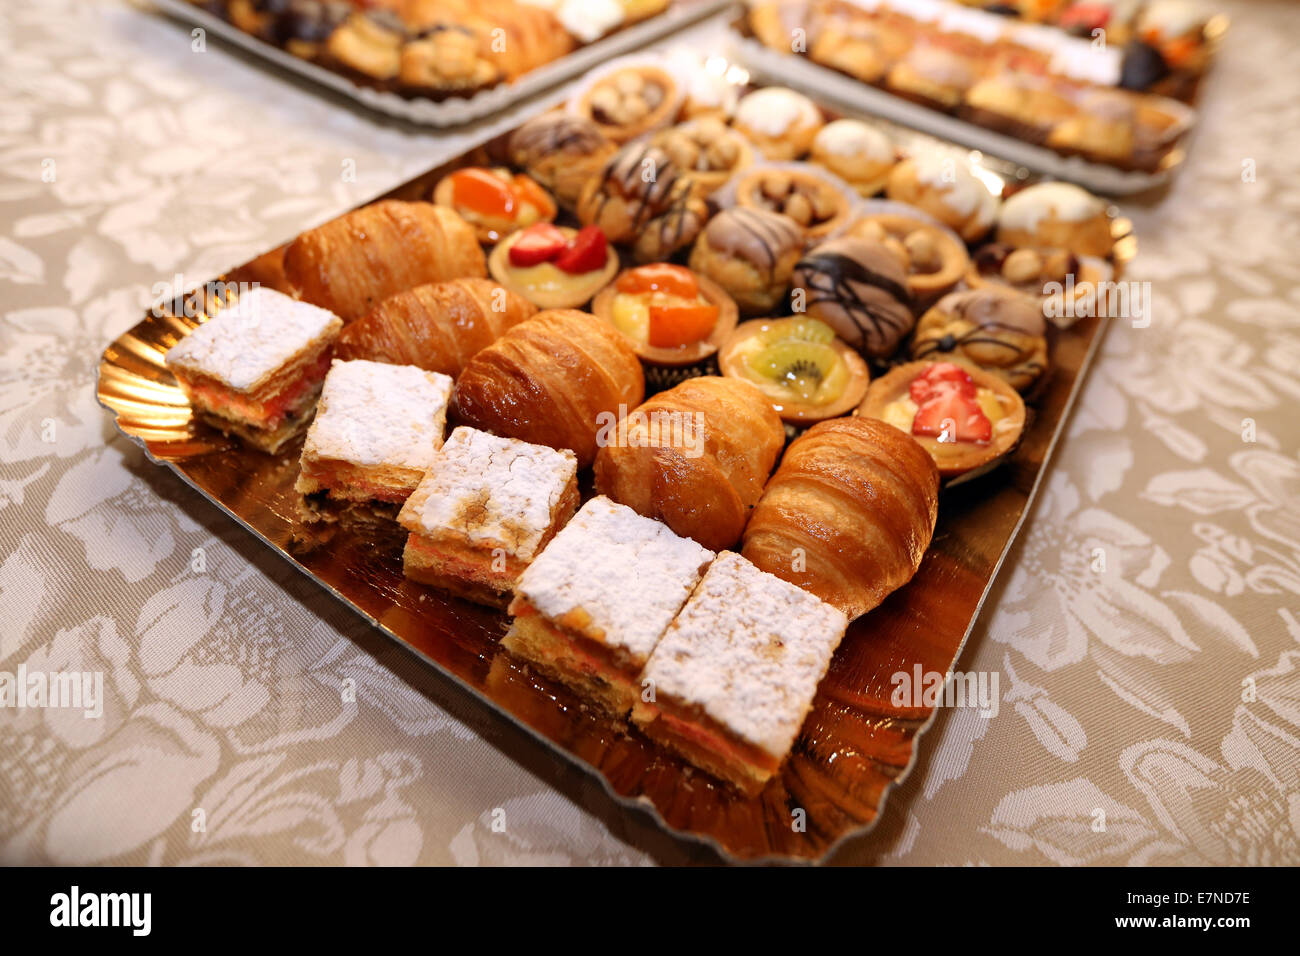 Cakes, Biscuits, Pastries from Italy Stock Photo